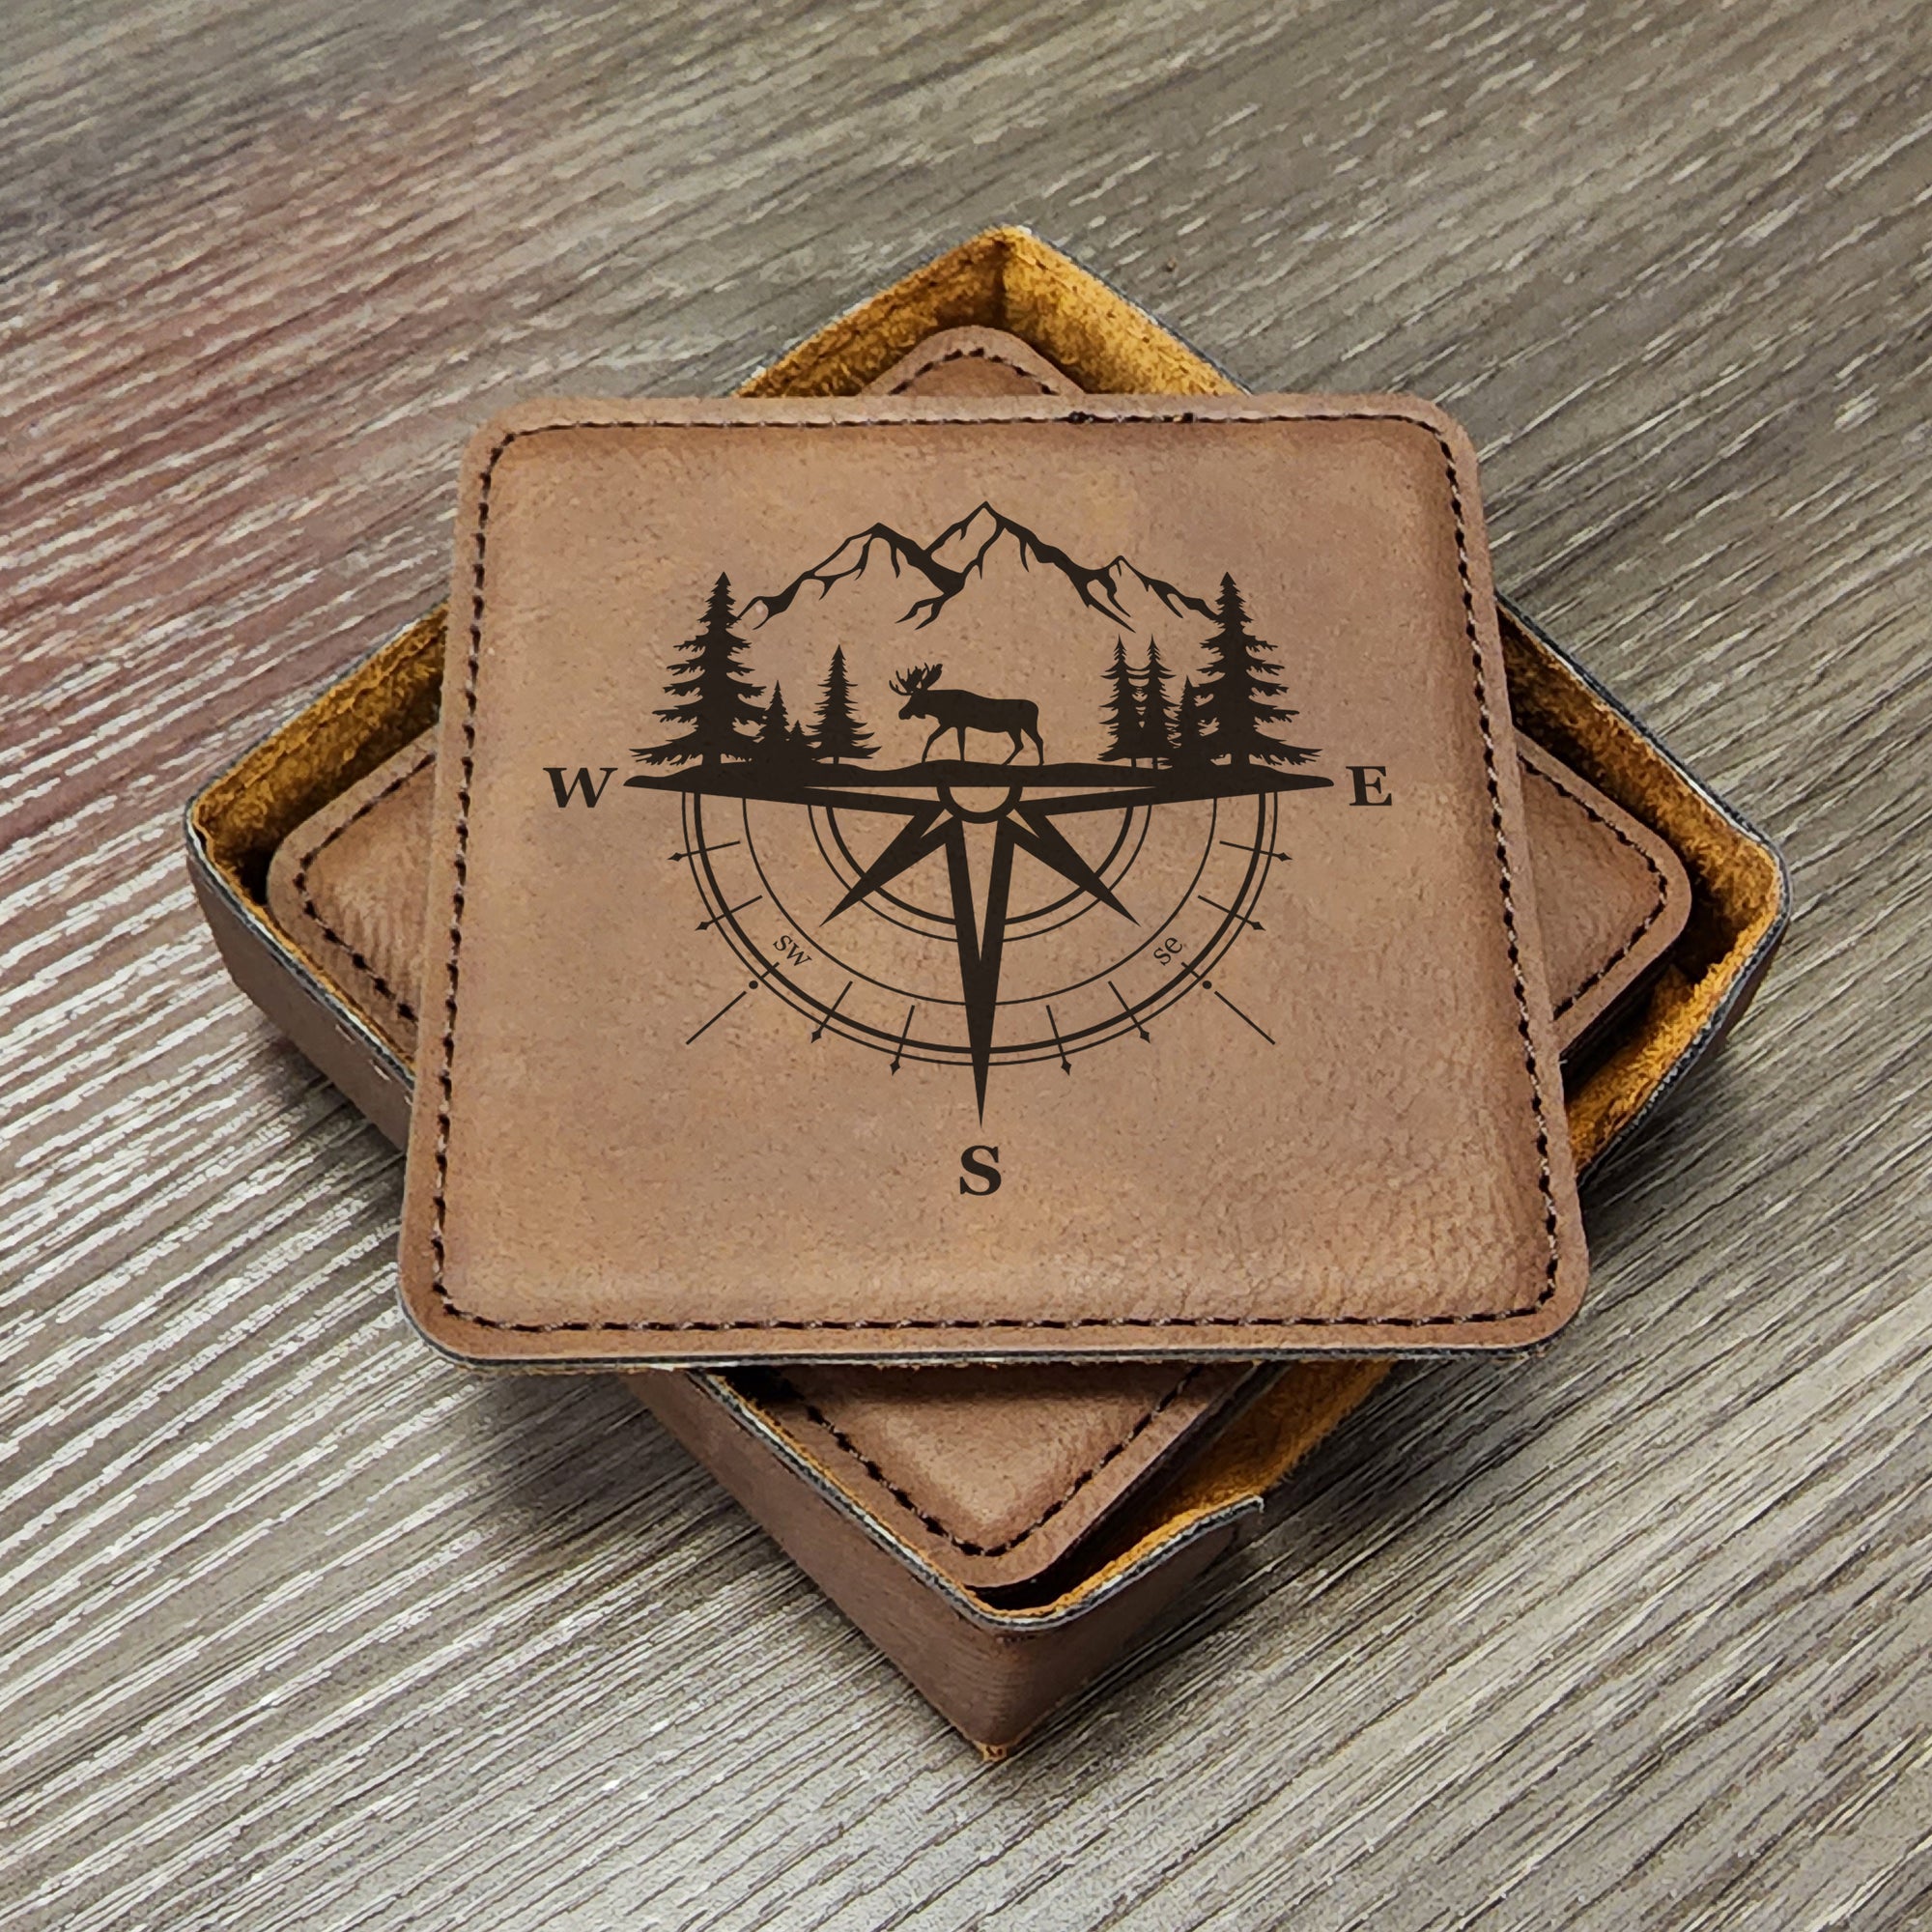 Mountain Ski Cabin Moose Coasters, Great for Cabin Vacation Homes in the Mountains, Set of 6 With Holder